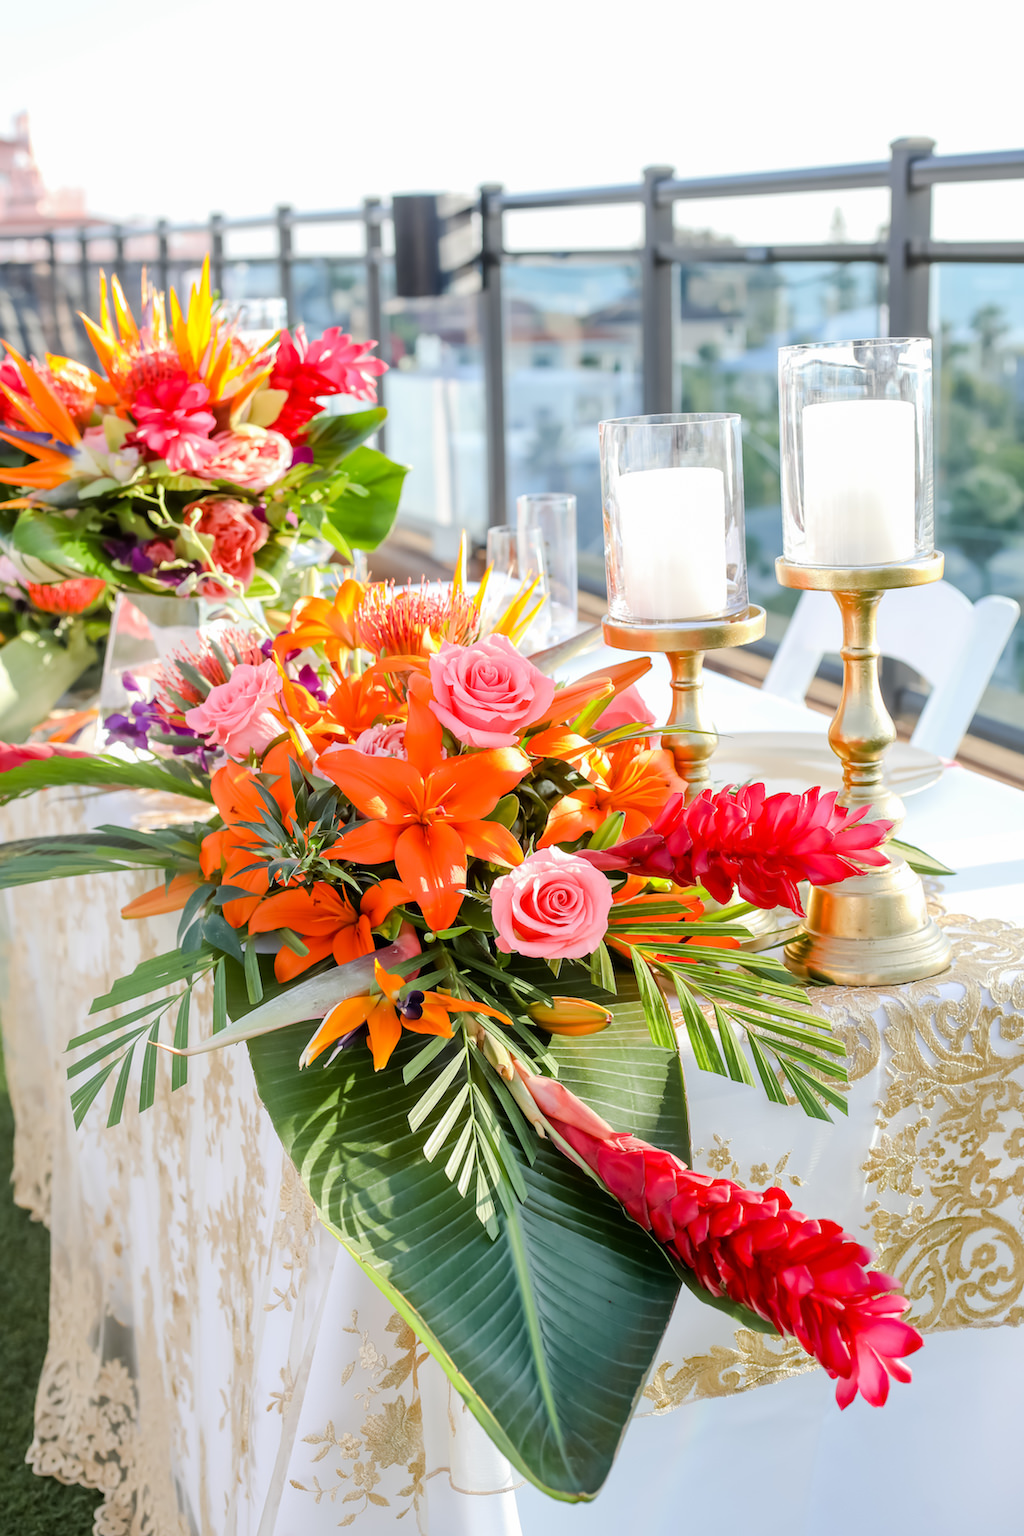 Tropical, Florida Beach Inspired Floral Arrangement for Sweetheart Table, White Tablecloth and Sheer Gold Lace Overlay, Vibrant Orange, Pink, Coral, Yellow, and Greenery Centerpiece, Rooftop Waterfront Wedding Reception | St. Pete Beach Wedding Venue Hotel Zamora | Tampa Bay Wedding Photographer Lifelong Photography Studios | Tampa Wedding Rentals Gabro Event Services